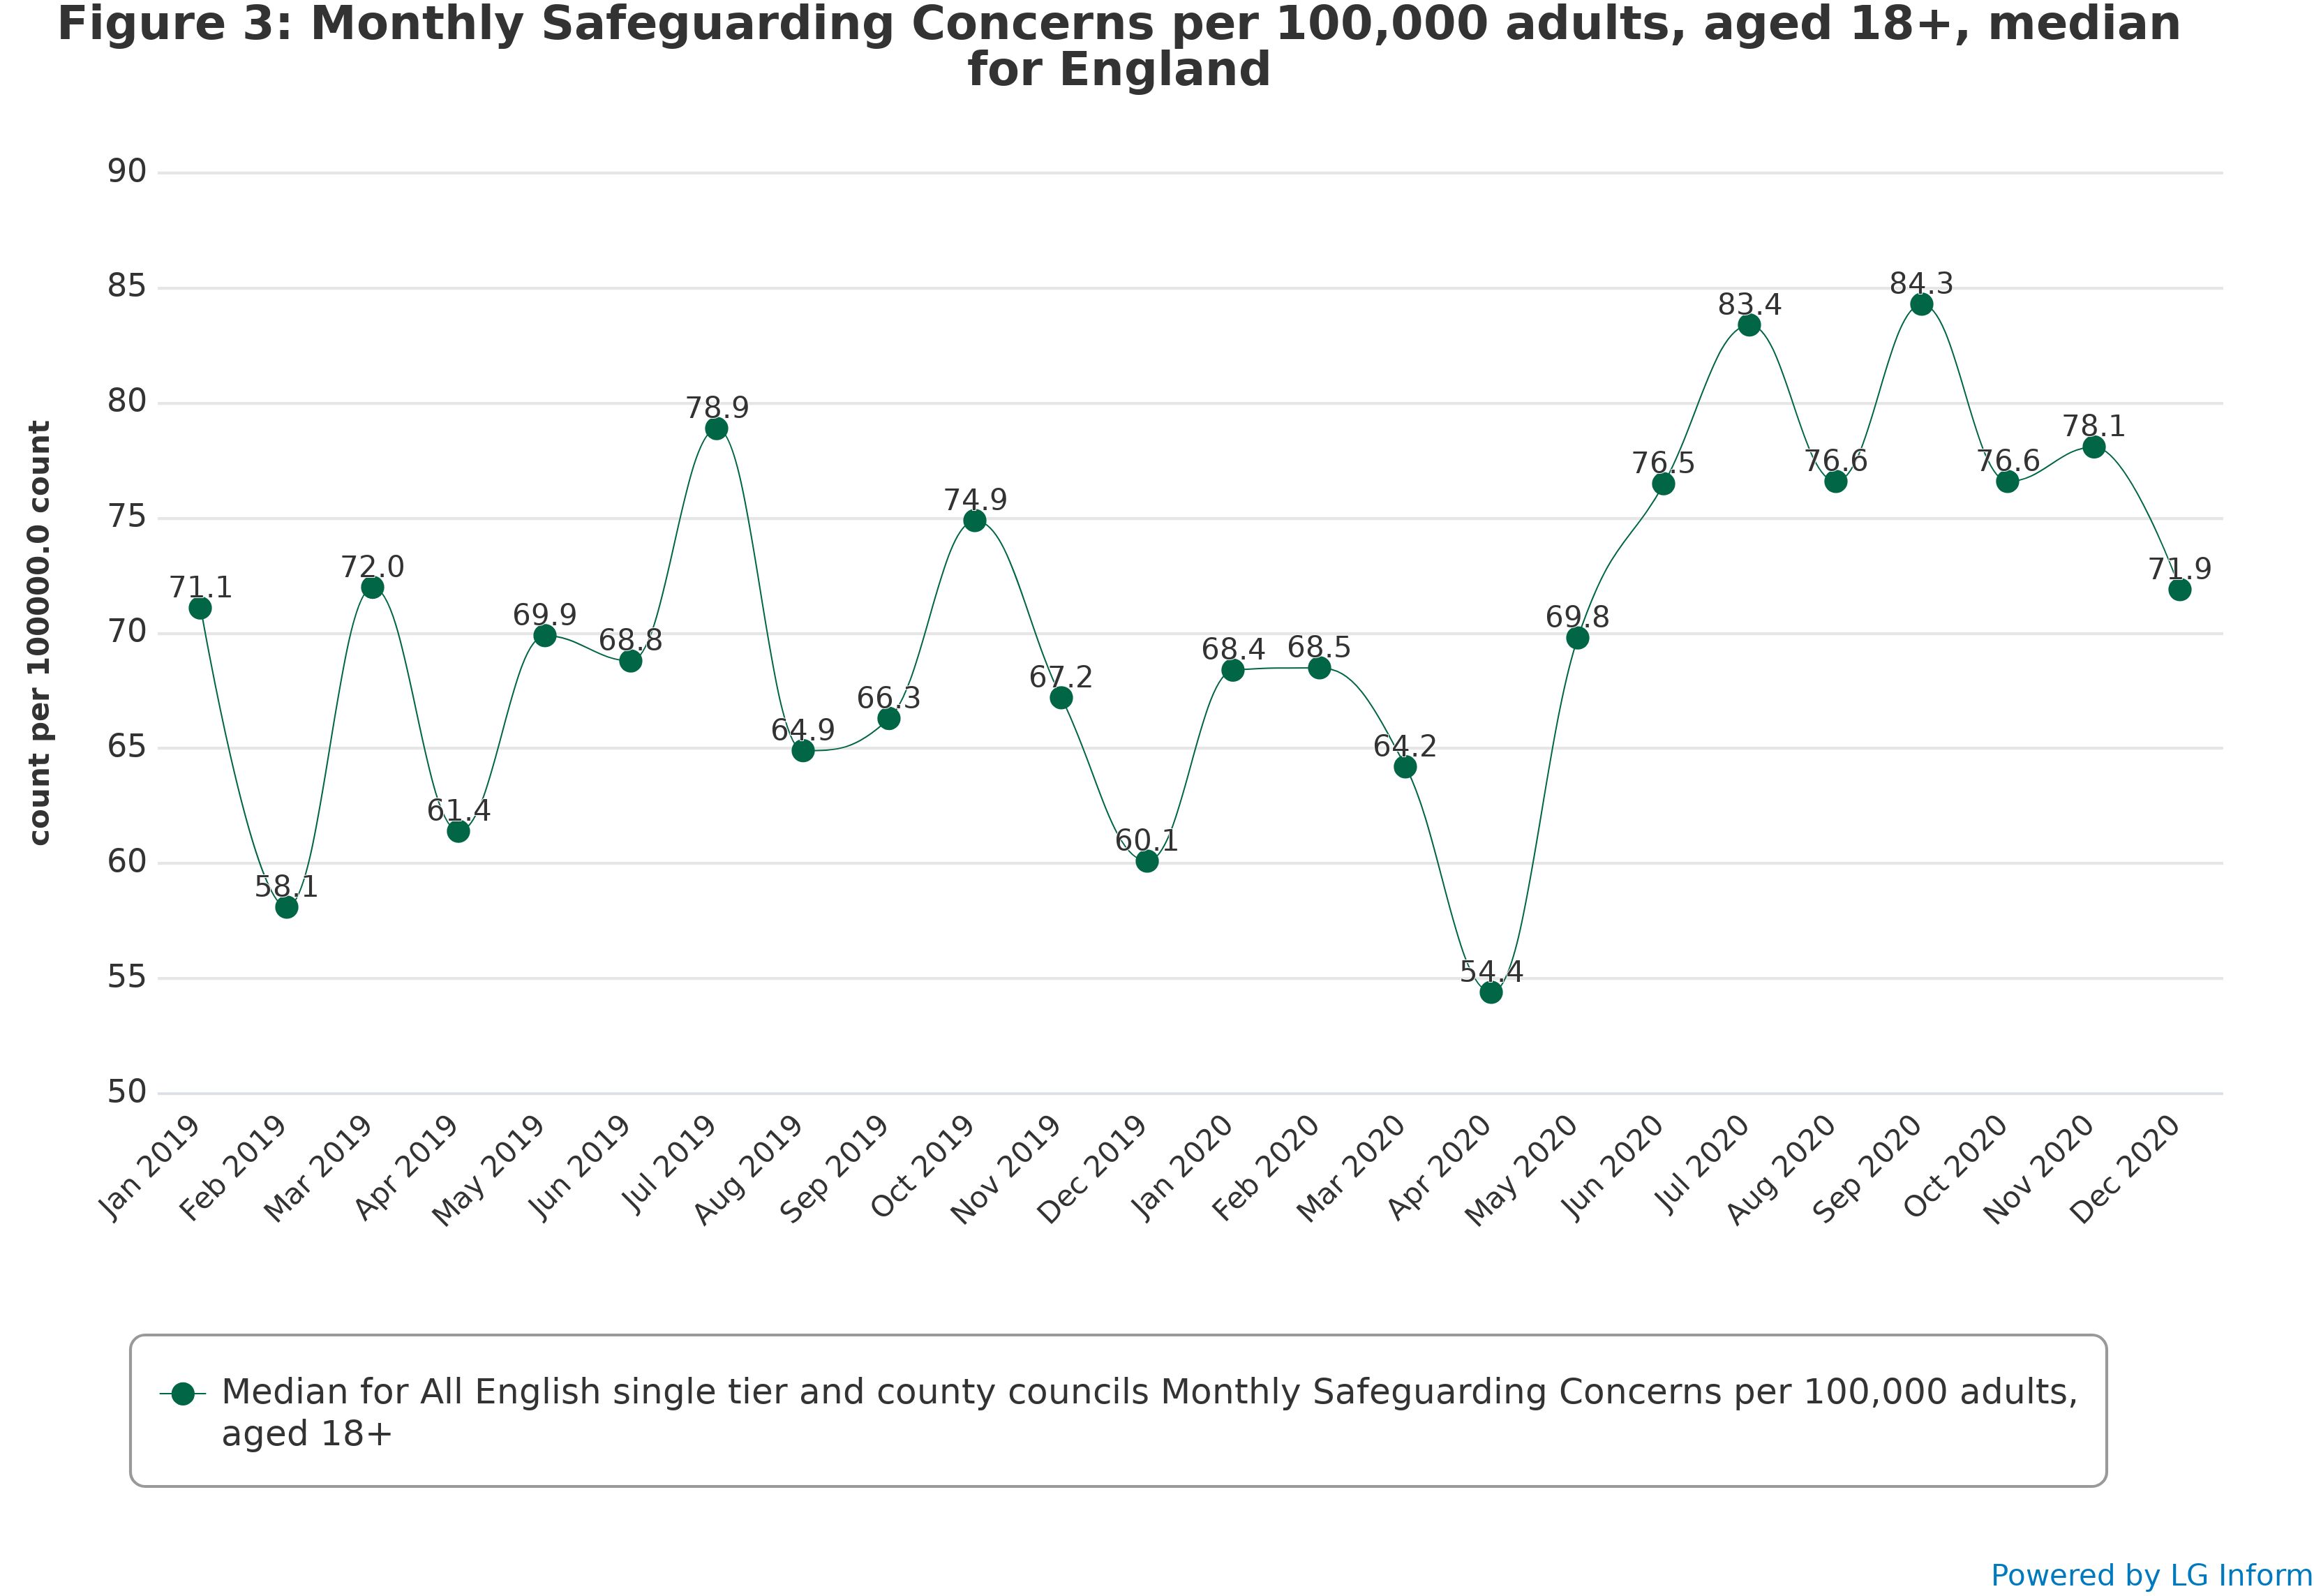 Figure 3: Monthly Safeguarding Concerns per 100,000 adults, aged 18+, median for England